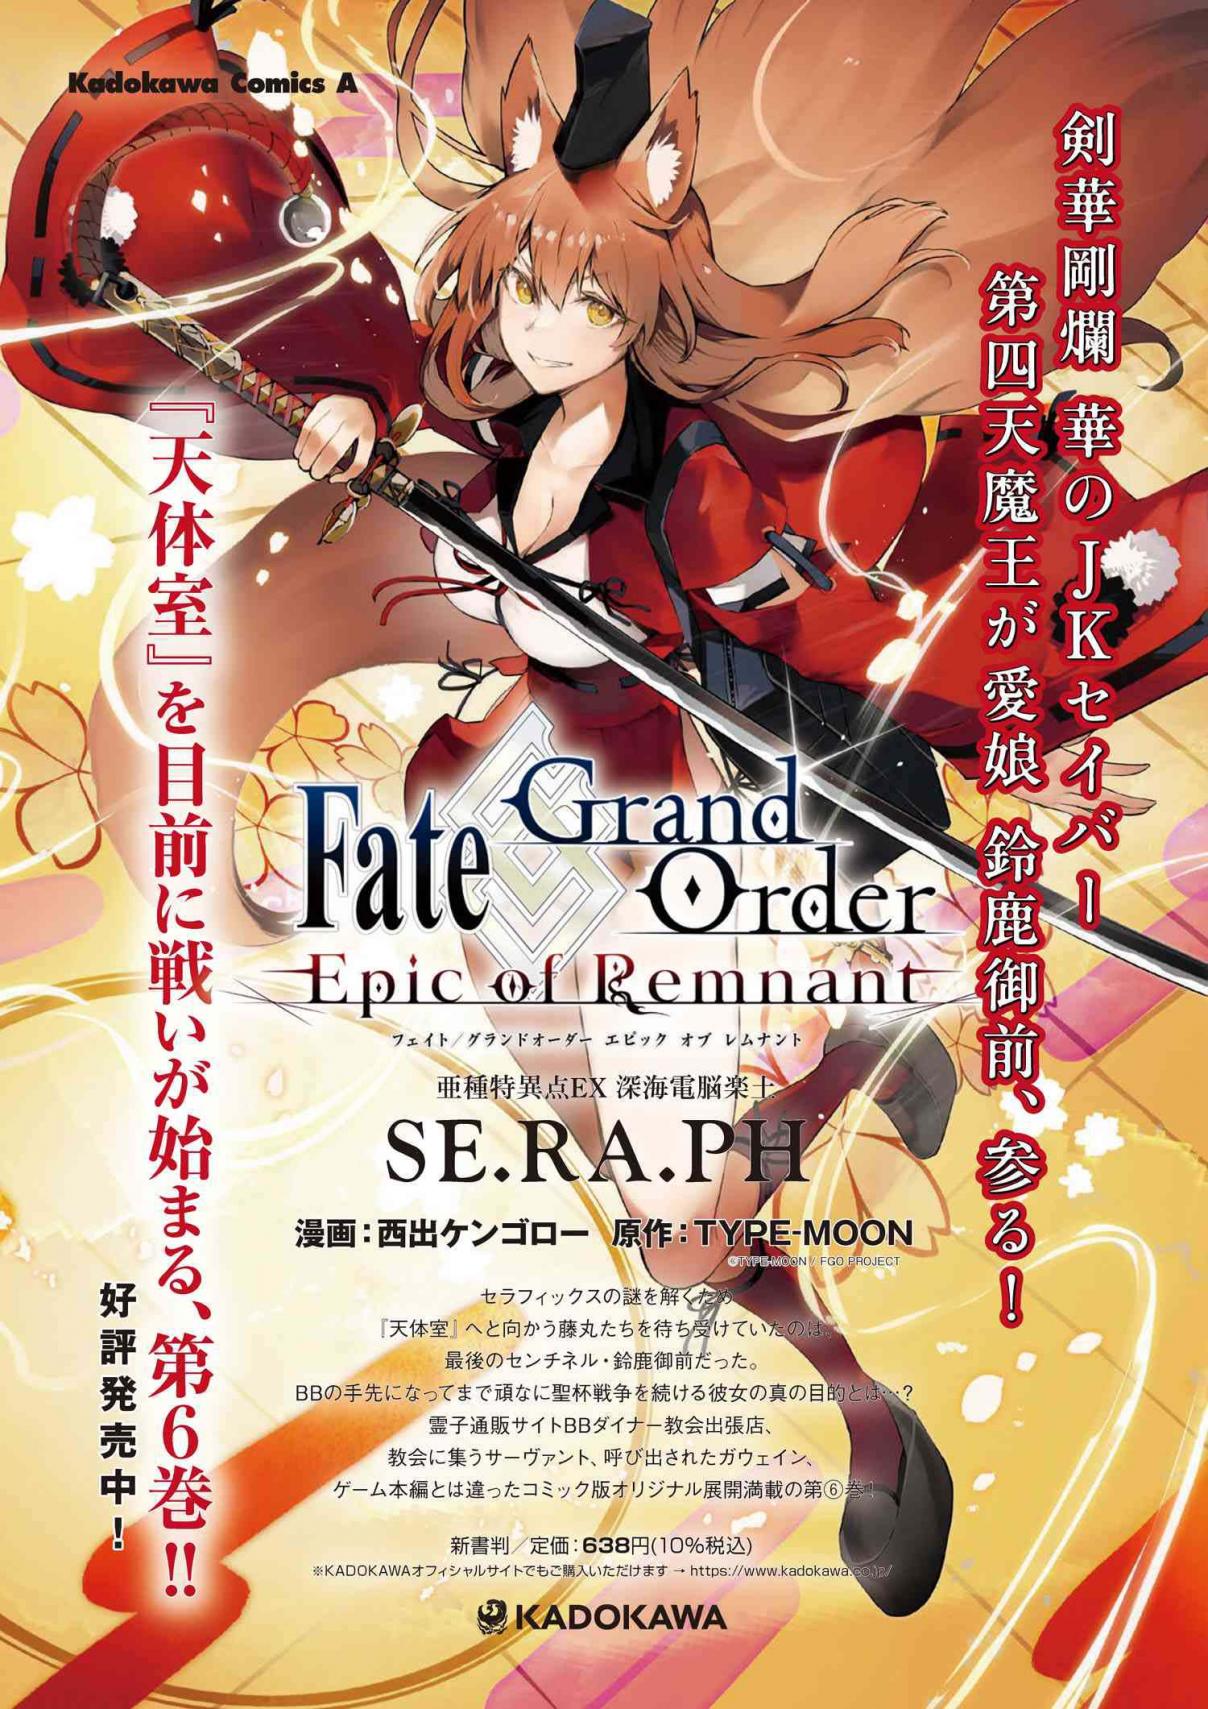 Fate/Grand Order -Epic of Remnant- Deep Sea Cyber-Paradise, SE.RA.PH 29.2